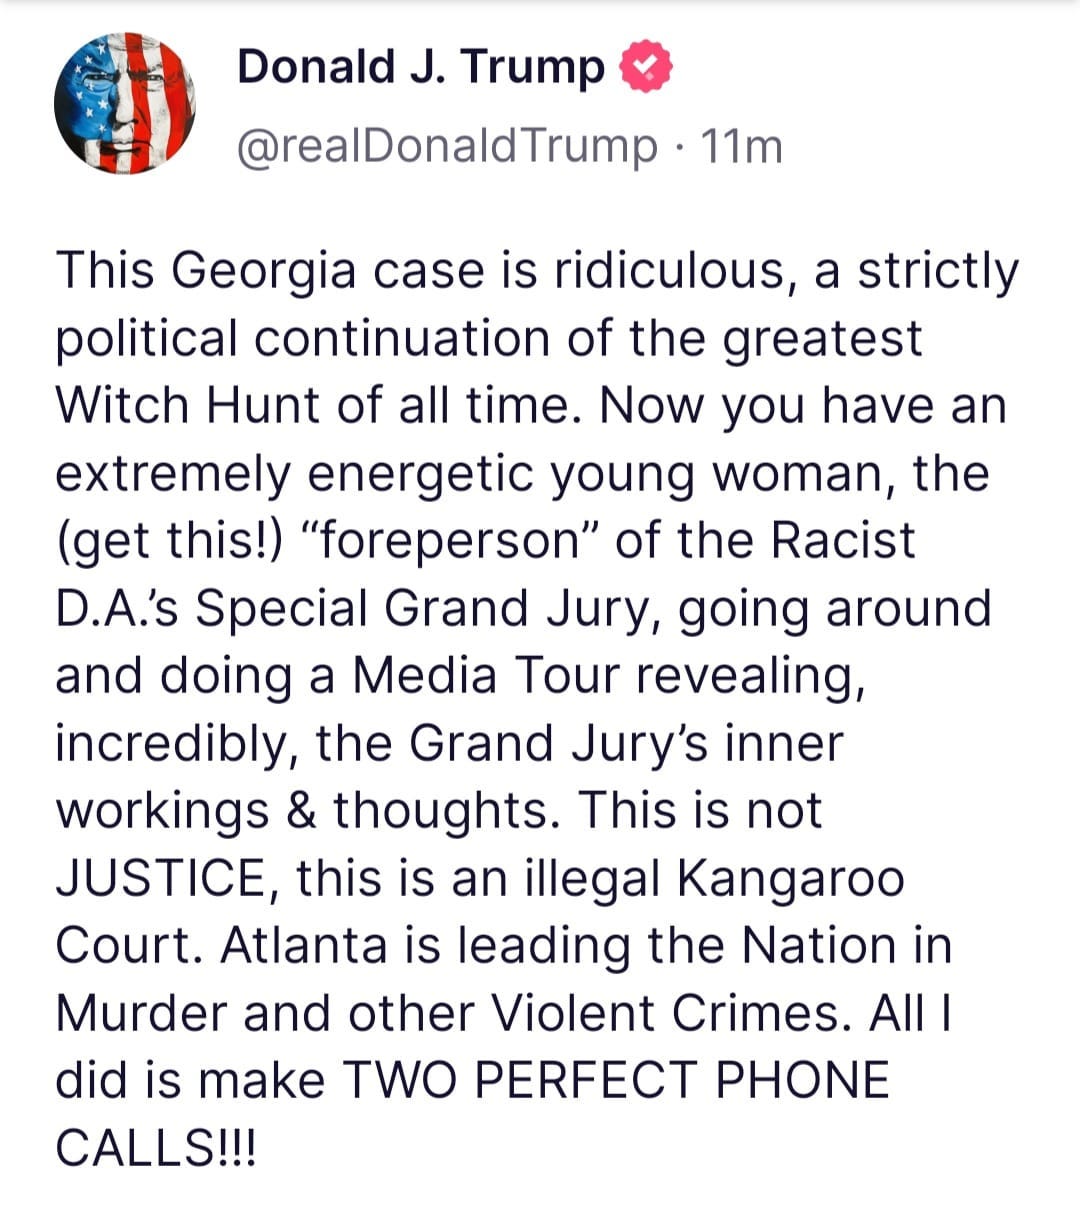 May be an image of text that says 'Donalo J. Trump @realDonaldTrump 11m This Georgia case is ridiculous, a strictly political continuation of the greatest Witch Hunt of all time. Now you have an extremely energetic young woman, the (get this!) "foreperson" of the Racist D.A.'s Special Grand Jury, going around arouno and doing a Media Tour revealing, incredibly, the Grand Jury's inner workings & thoughts. This is not JUSTICE, this is an illegal Kangaroo Court. Atlanta is leading the Nation in Murder and other Violent Crimes. AIlI did is make TWO PERFECT PHONE CALLS!!!'